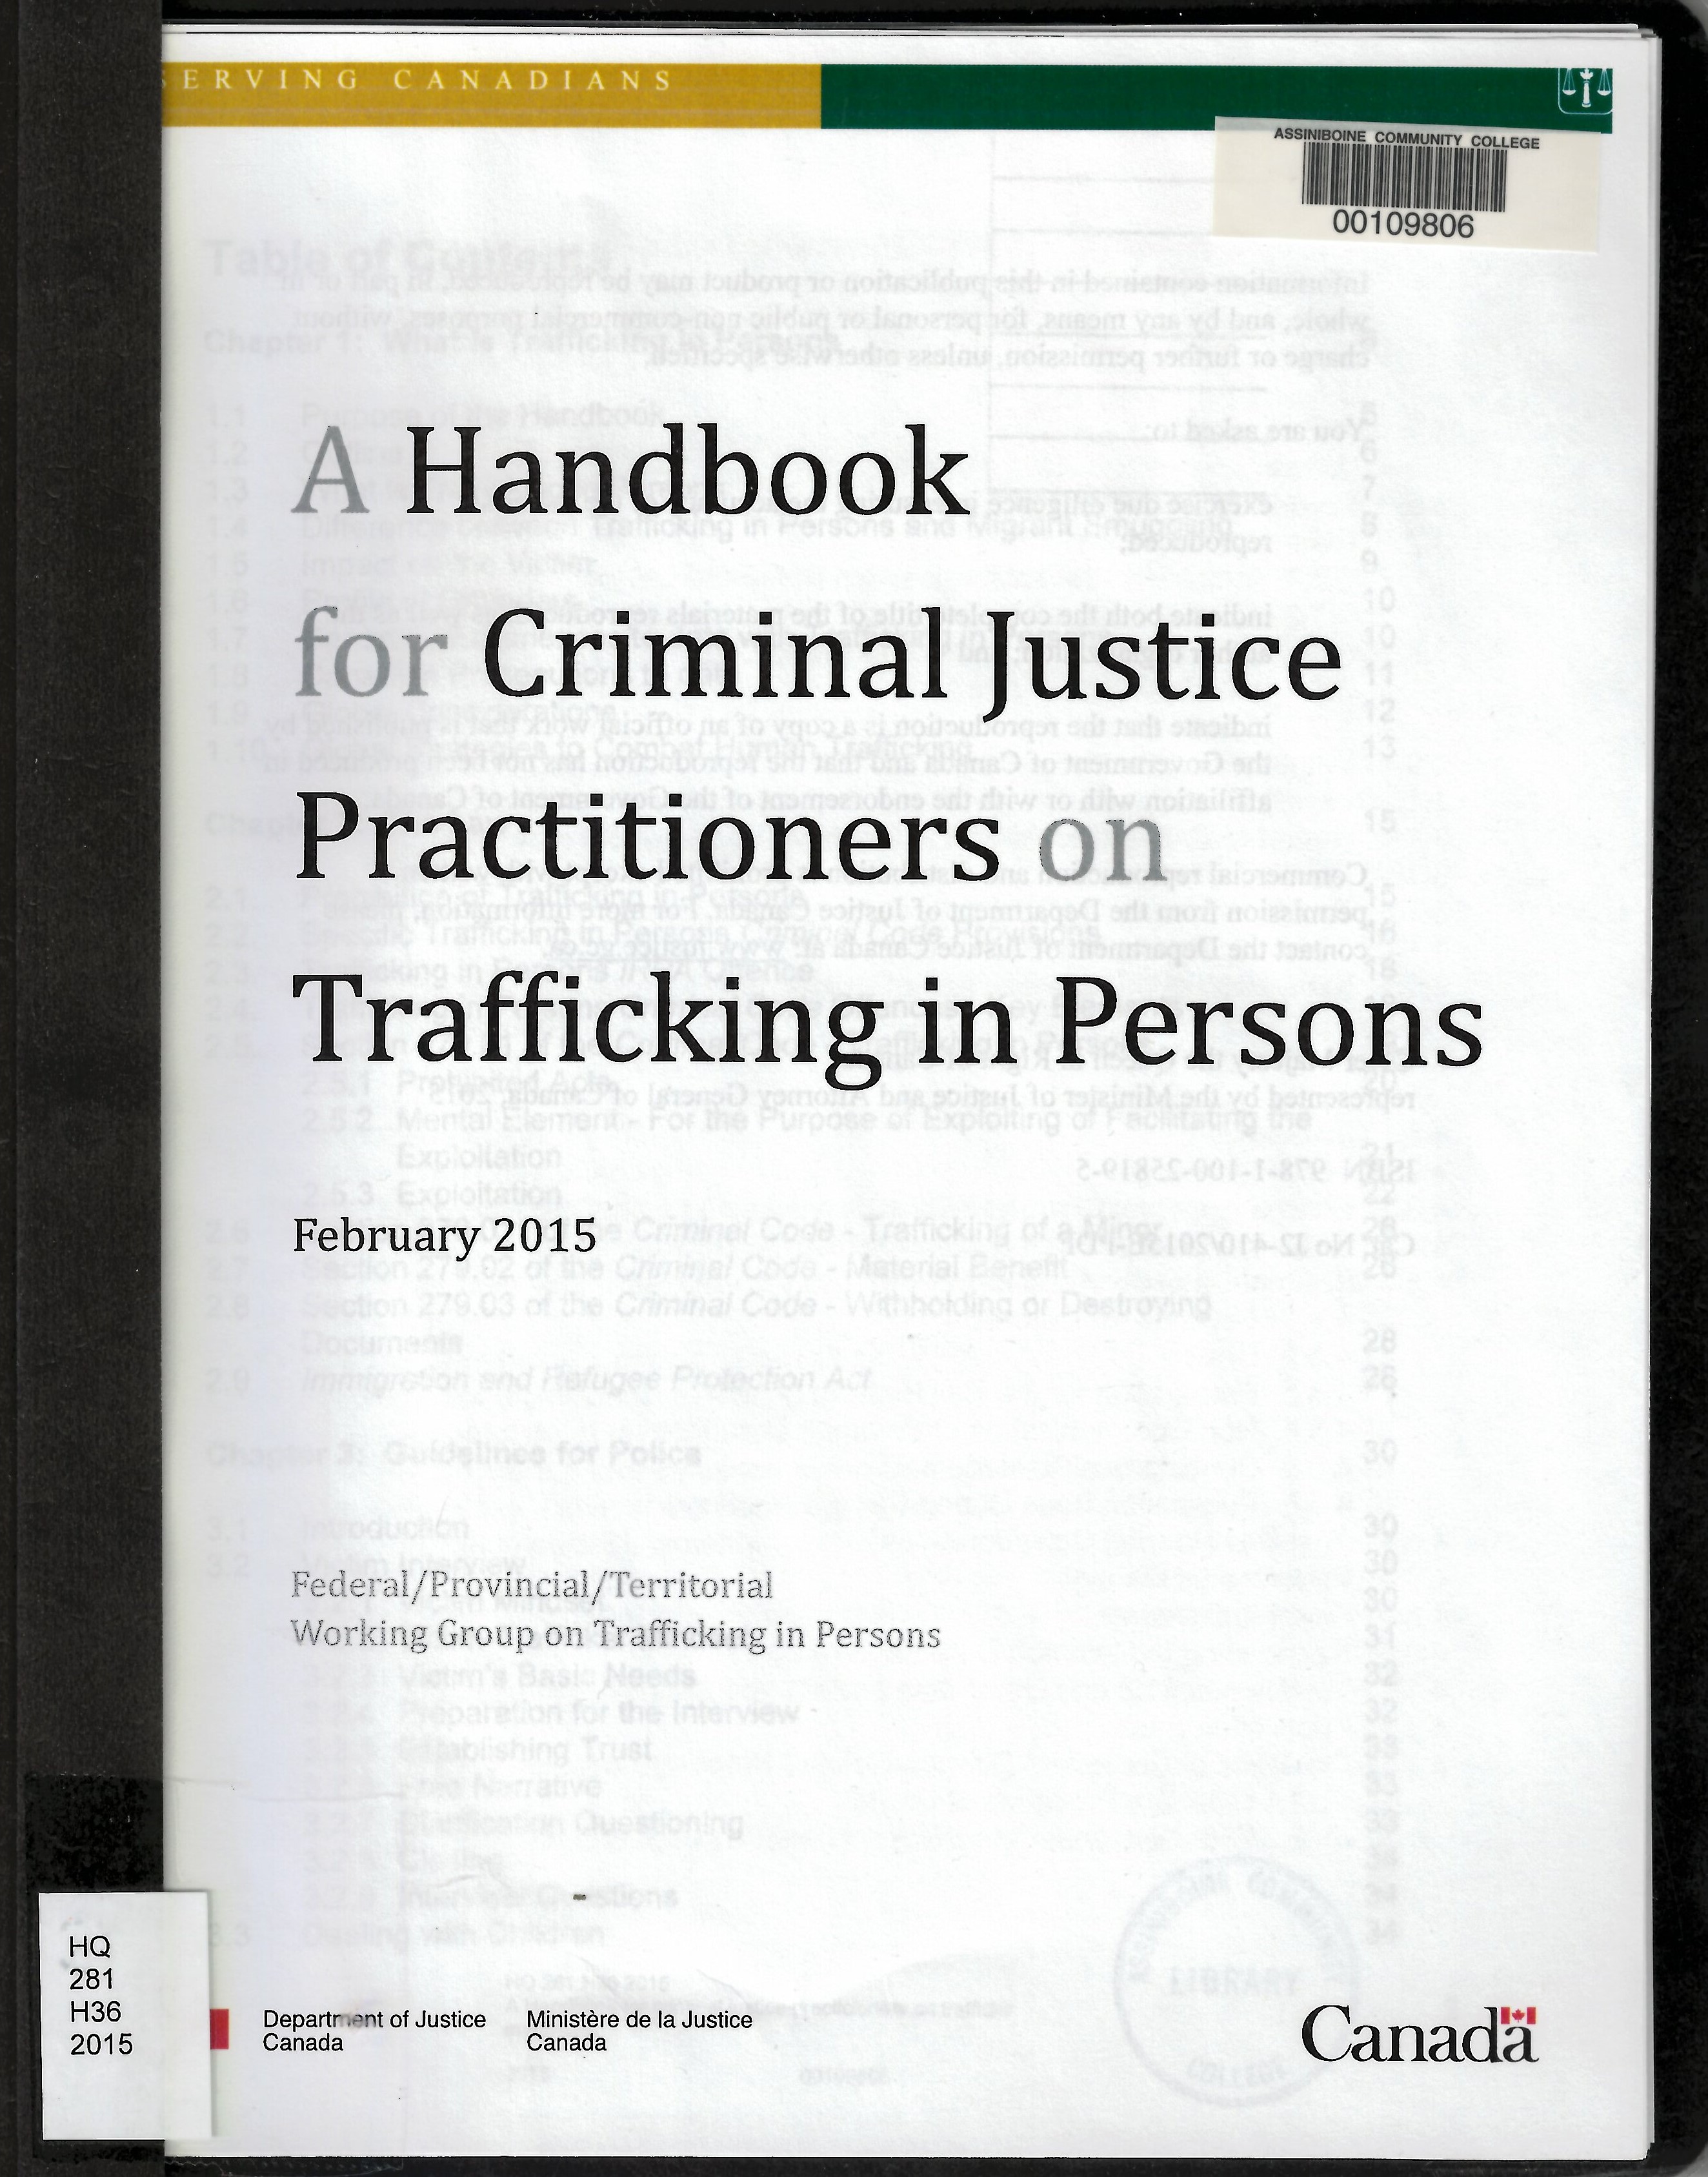 A Handbook for criminal justice practicioners on trafficking in persons